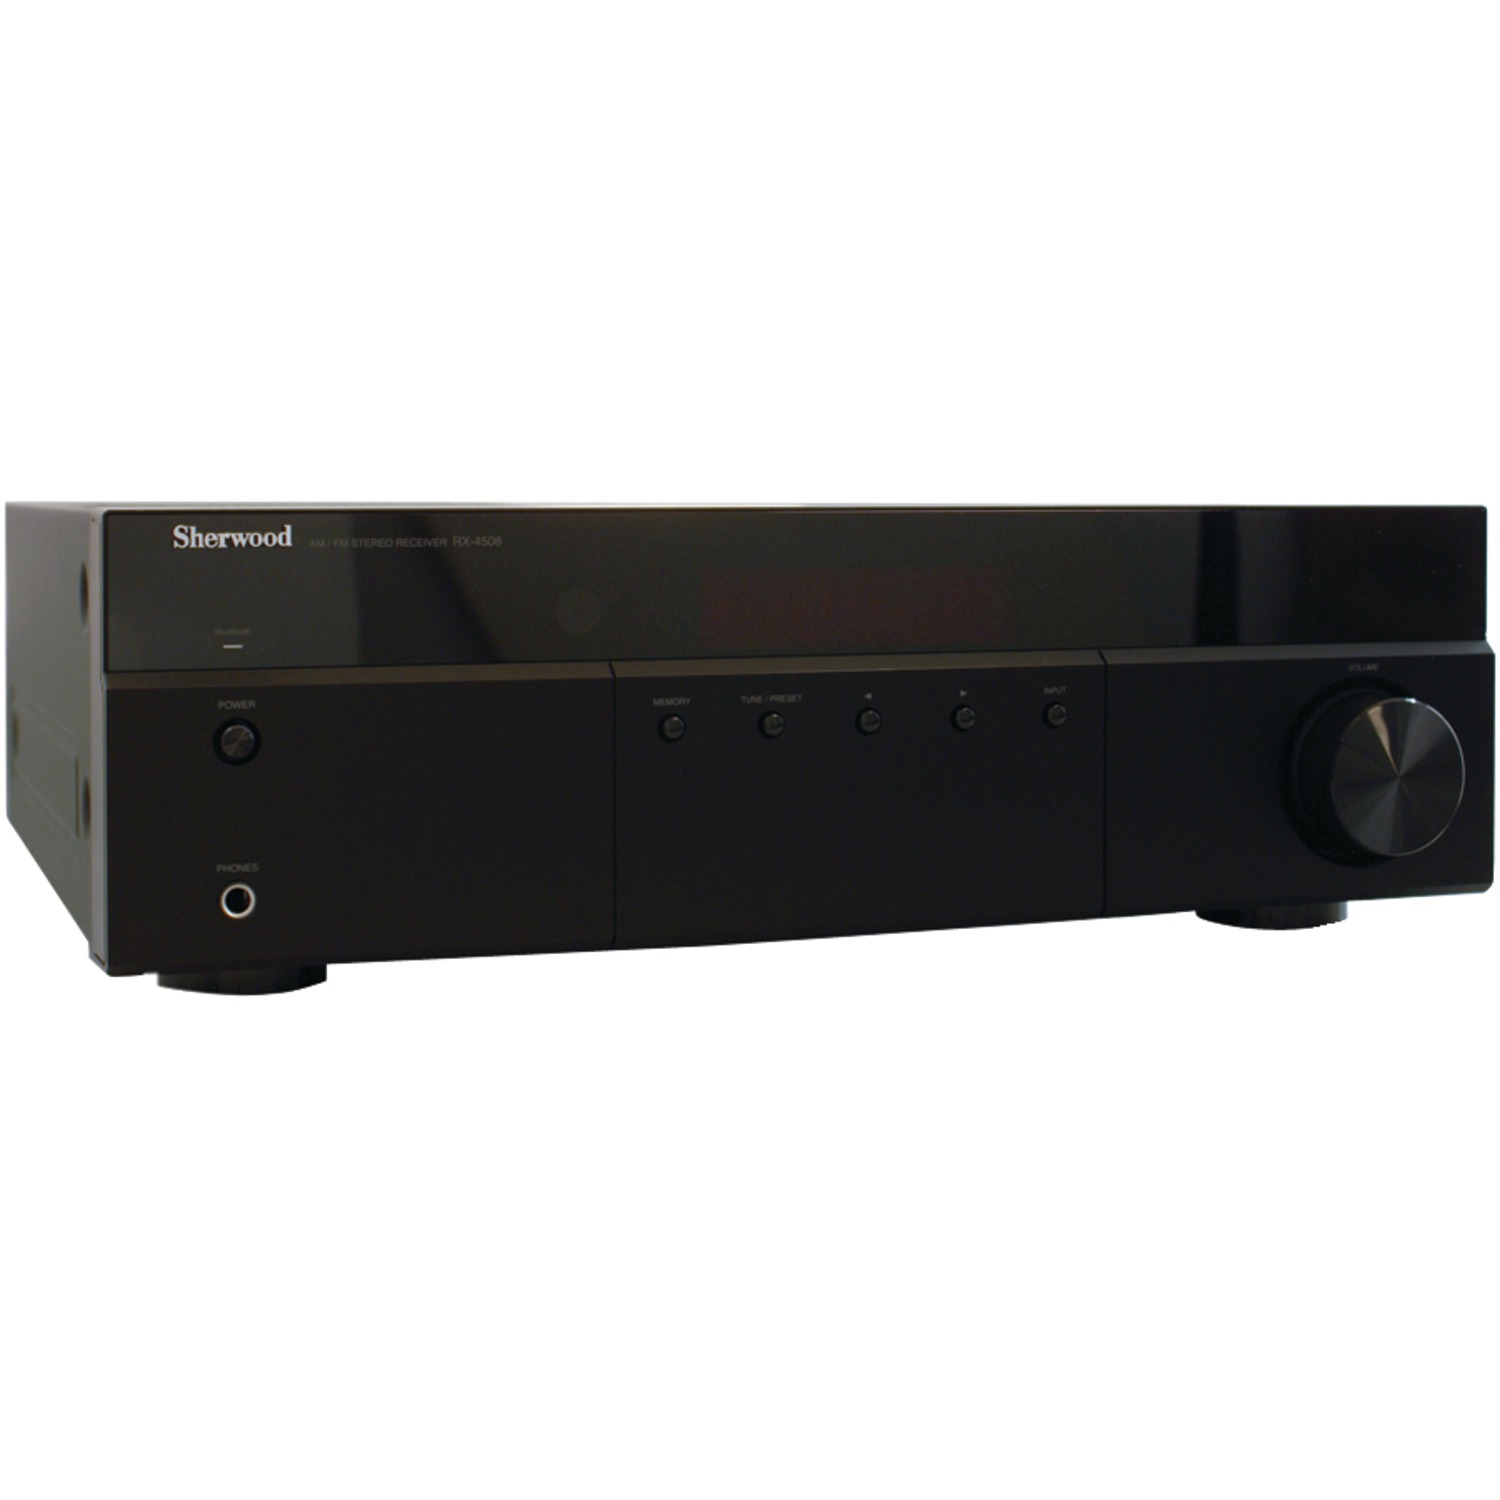 Sherwood RX-4508 200-Watt AM/FM Stereo Receiver with Bluetooth - image 2 of 3